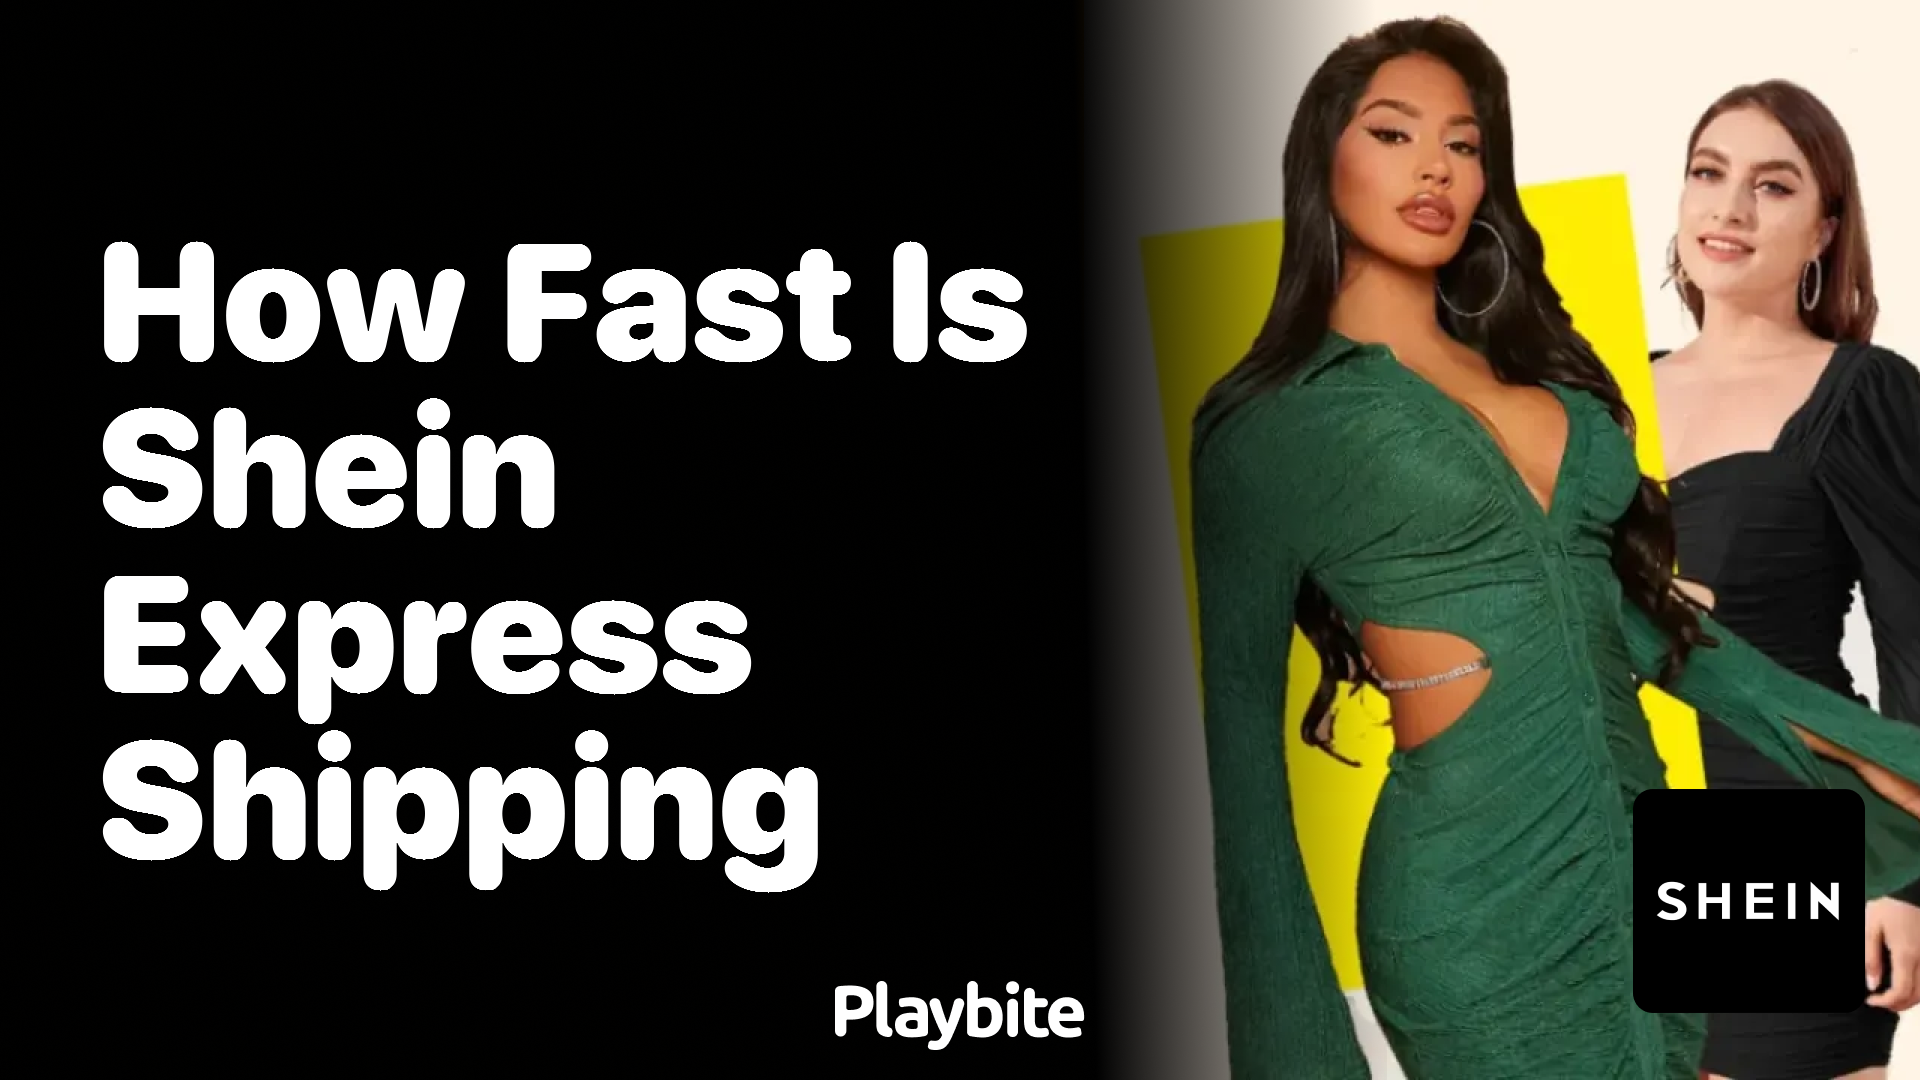 Is Shein Express Shipping Fast? - Playbite